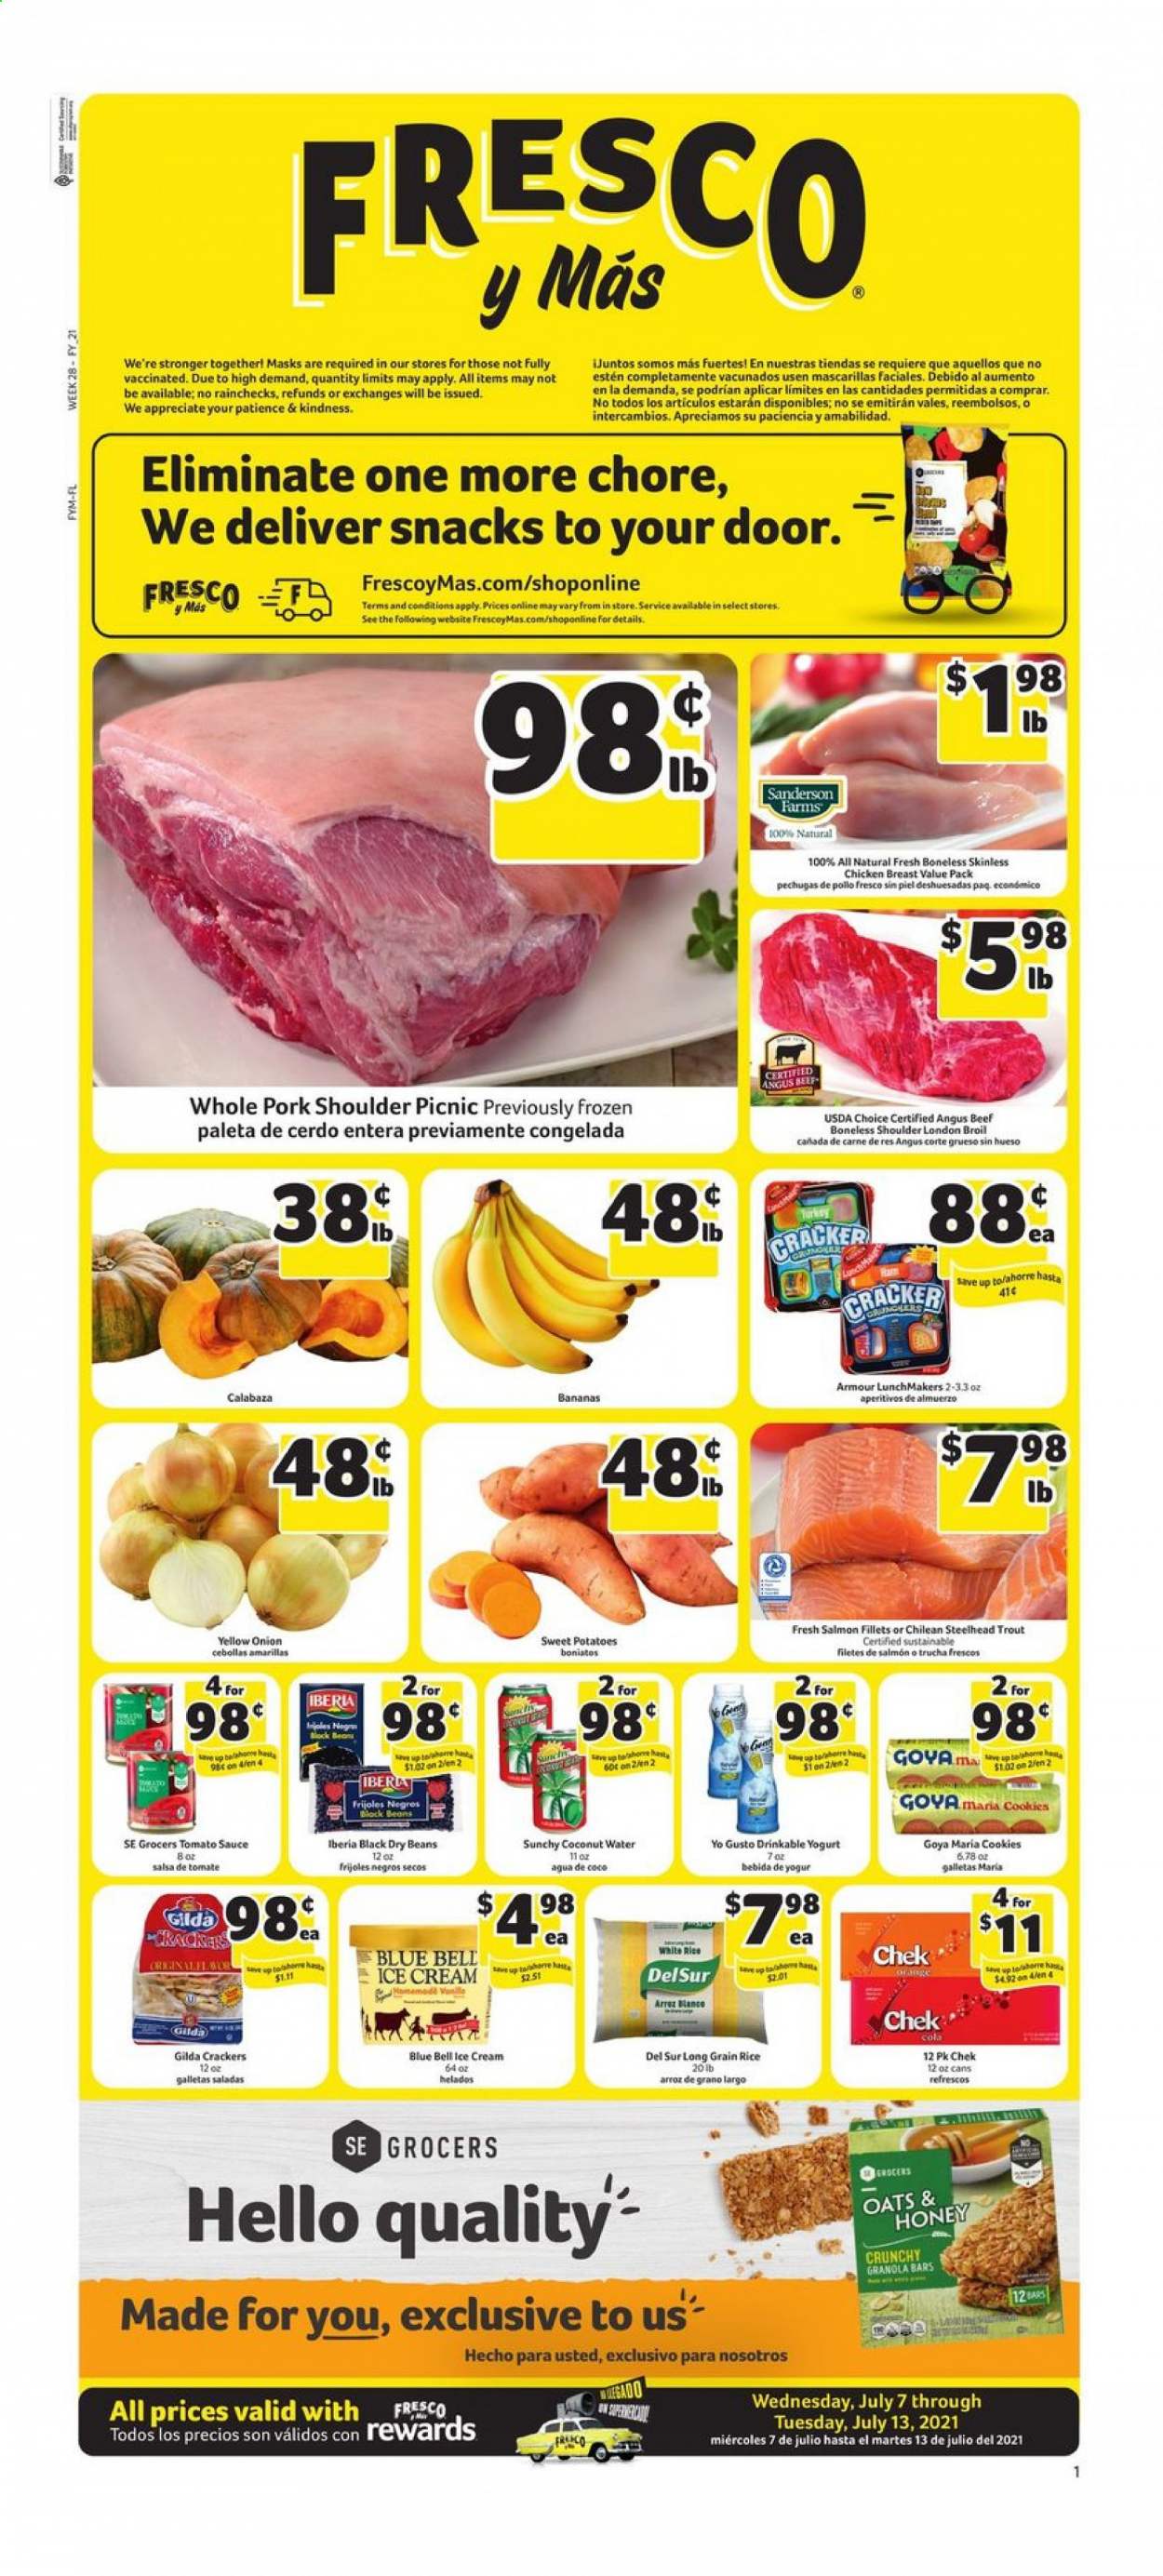 thumbnail - Fresco y Más Flyer - 07/07/2021 - 07/13/2021 - Sales products - beans, sweet potato, potatoes, onion, oranges, salmon, salmon fillet, trout, sauce, ham, yoghurt, ice cream, Blue Bell, cookies, crackers, tomato sauce, Goya, granola bar, rice, white rice, dry beans, long grain rice, salsa, honey, coconut water, chicken breasts, beef meat, pork meat, pork shoulder. Page 1.